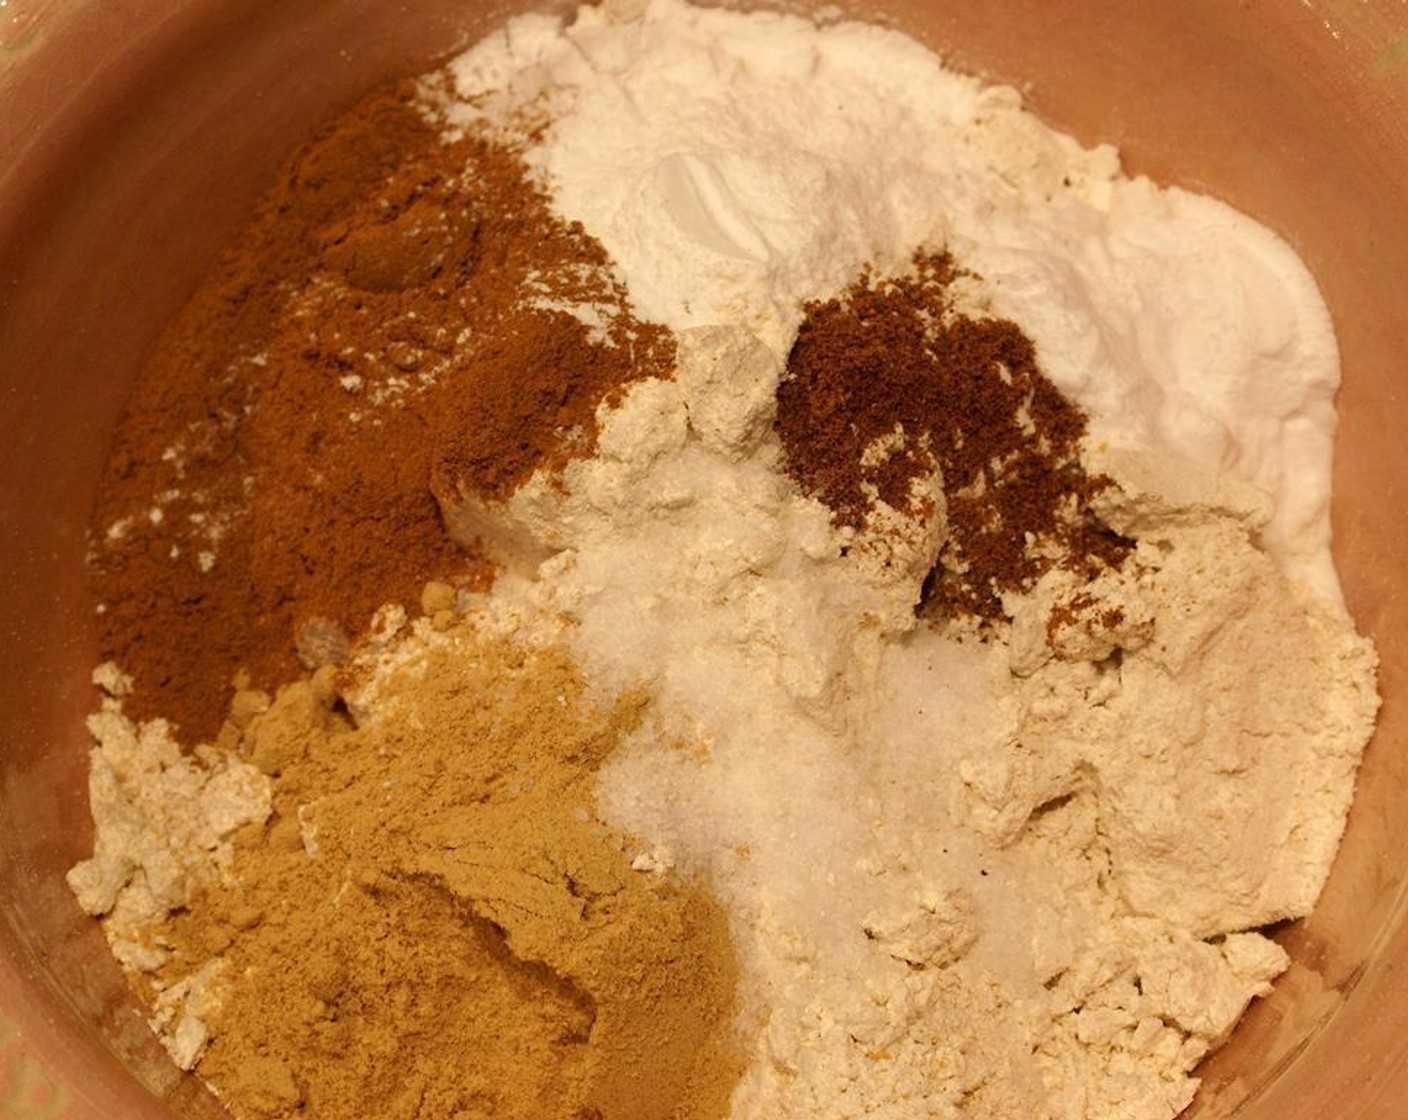 step 3 Whisk Whole Wheat Pastry Flour (2 cups), Baking Powder (1/2 Tbsp), Baking Soda (1/2 Tbsp), Ground Ginger (2 Tbsp), Ground Cinnamon (1 Tbsp), Ground Nutmeg (1/4 tsp), and Salt (1 tsp) together in a bowl. Add in Vanilla Extract (1 Tbsp).